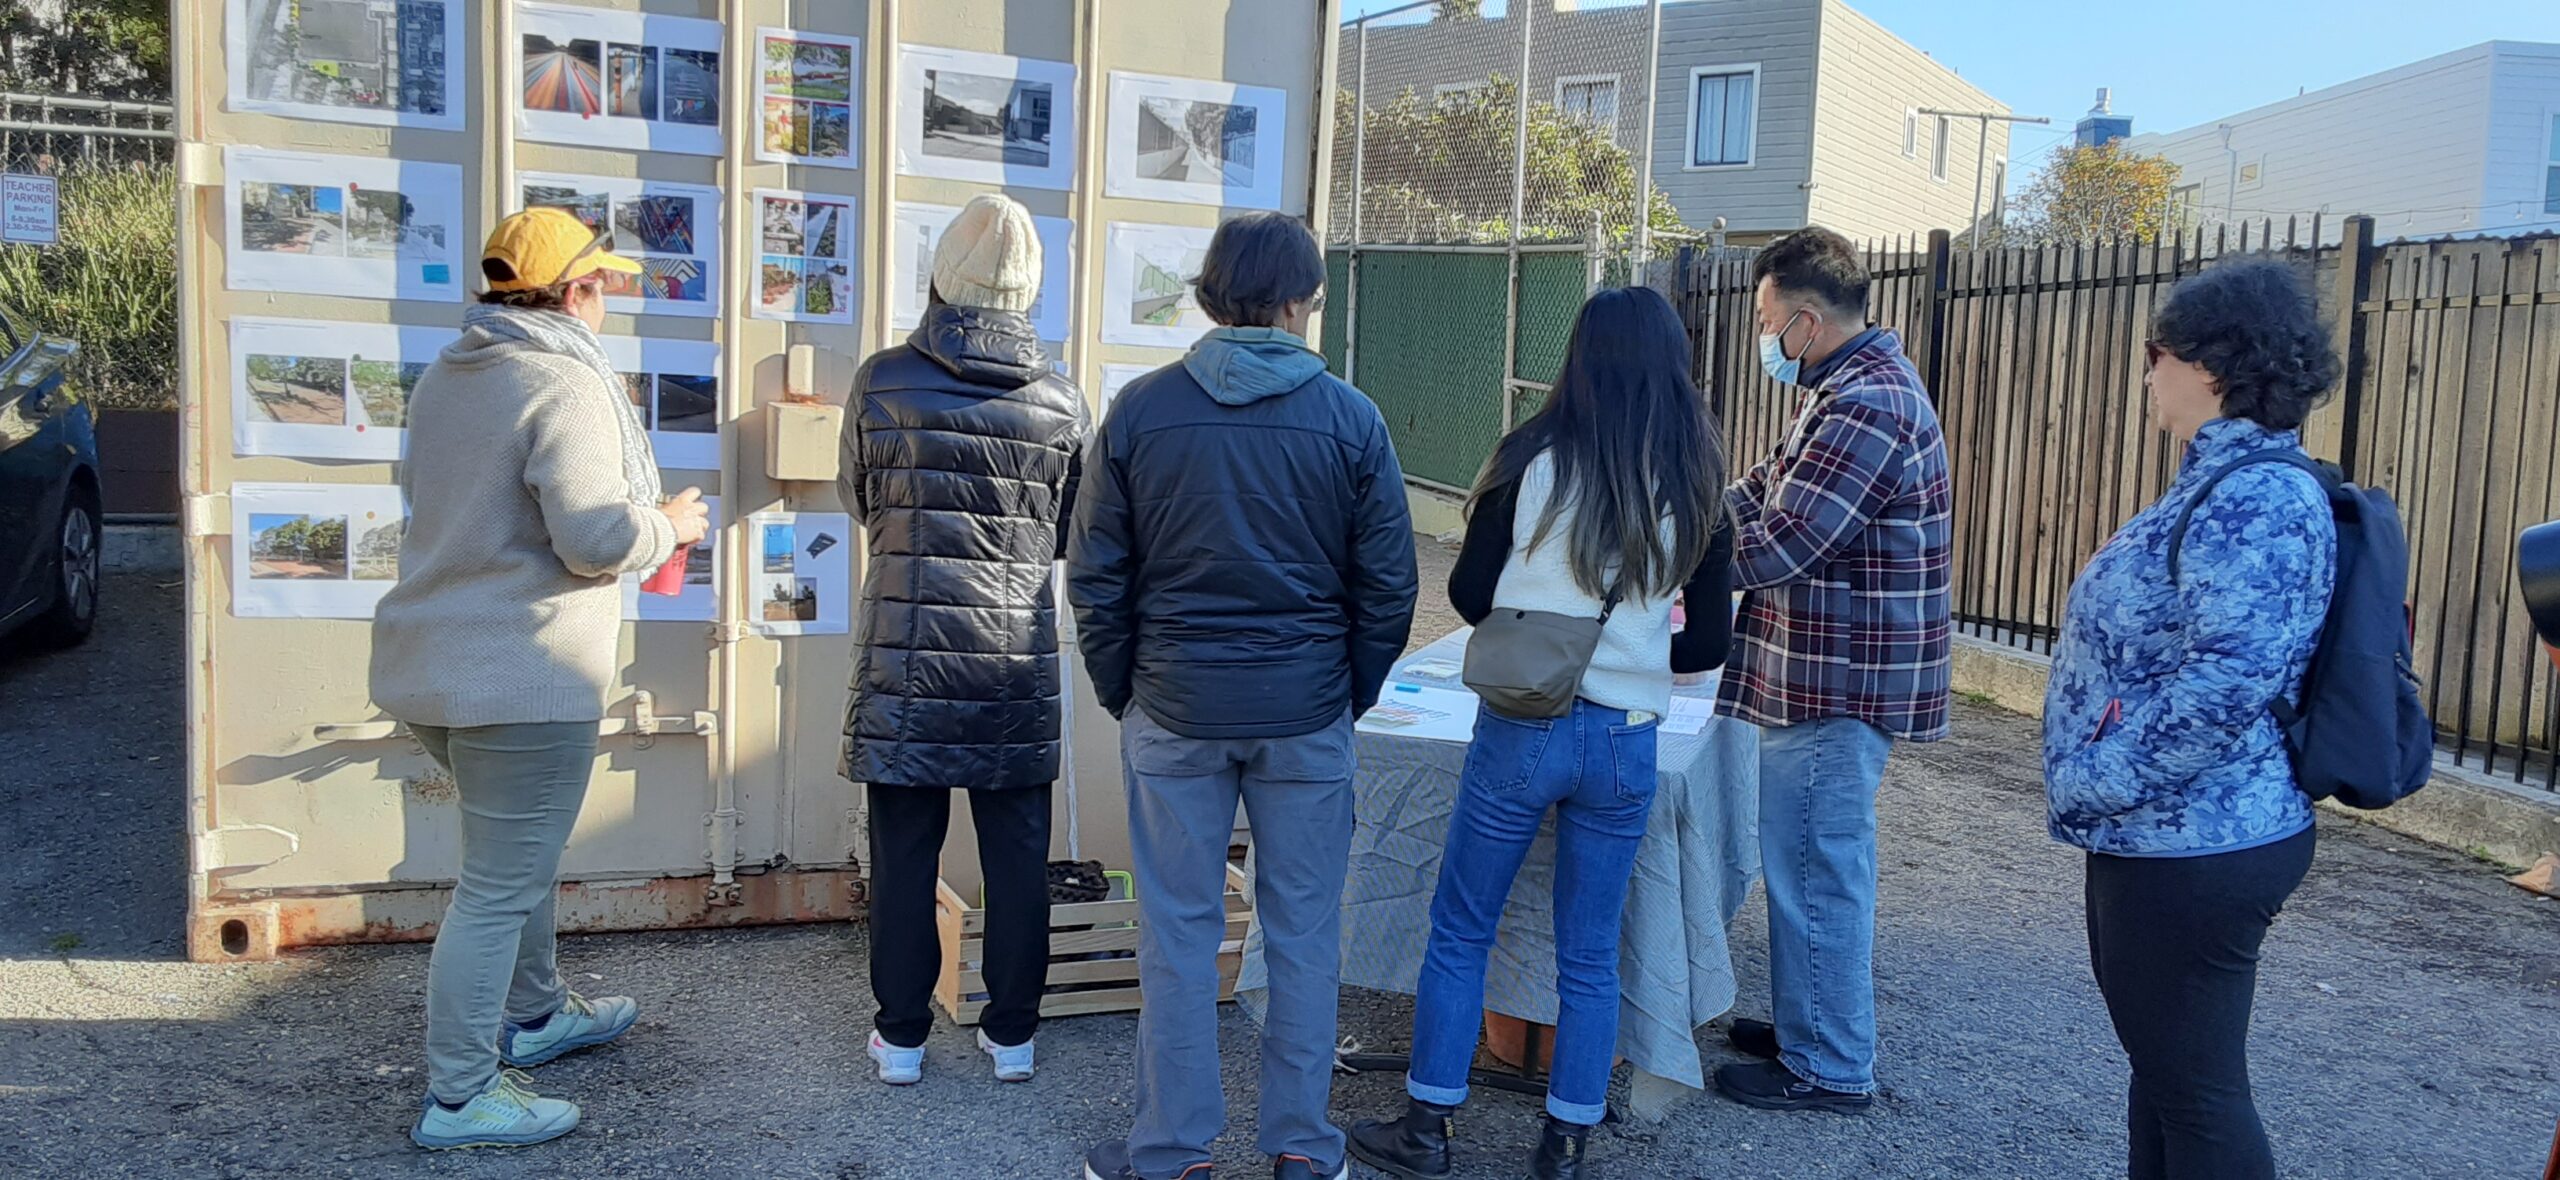 Six community members in cold weather clothes review design ideas on sheets of paper affixed to a storage container.